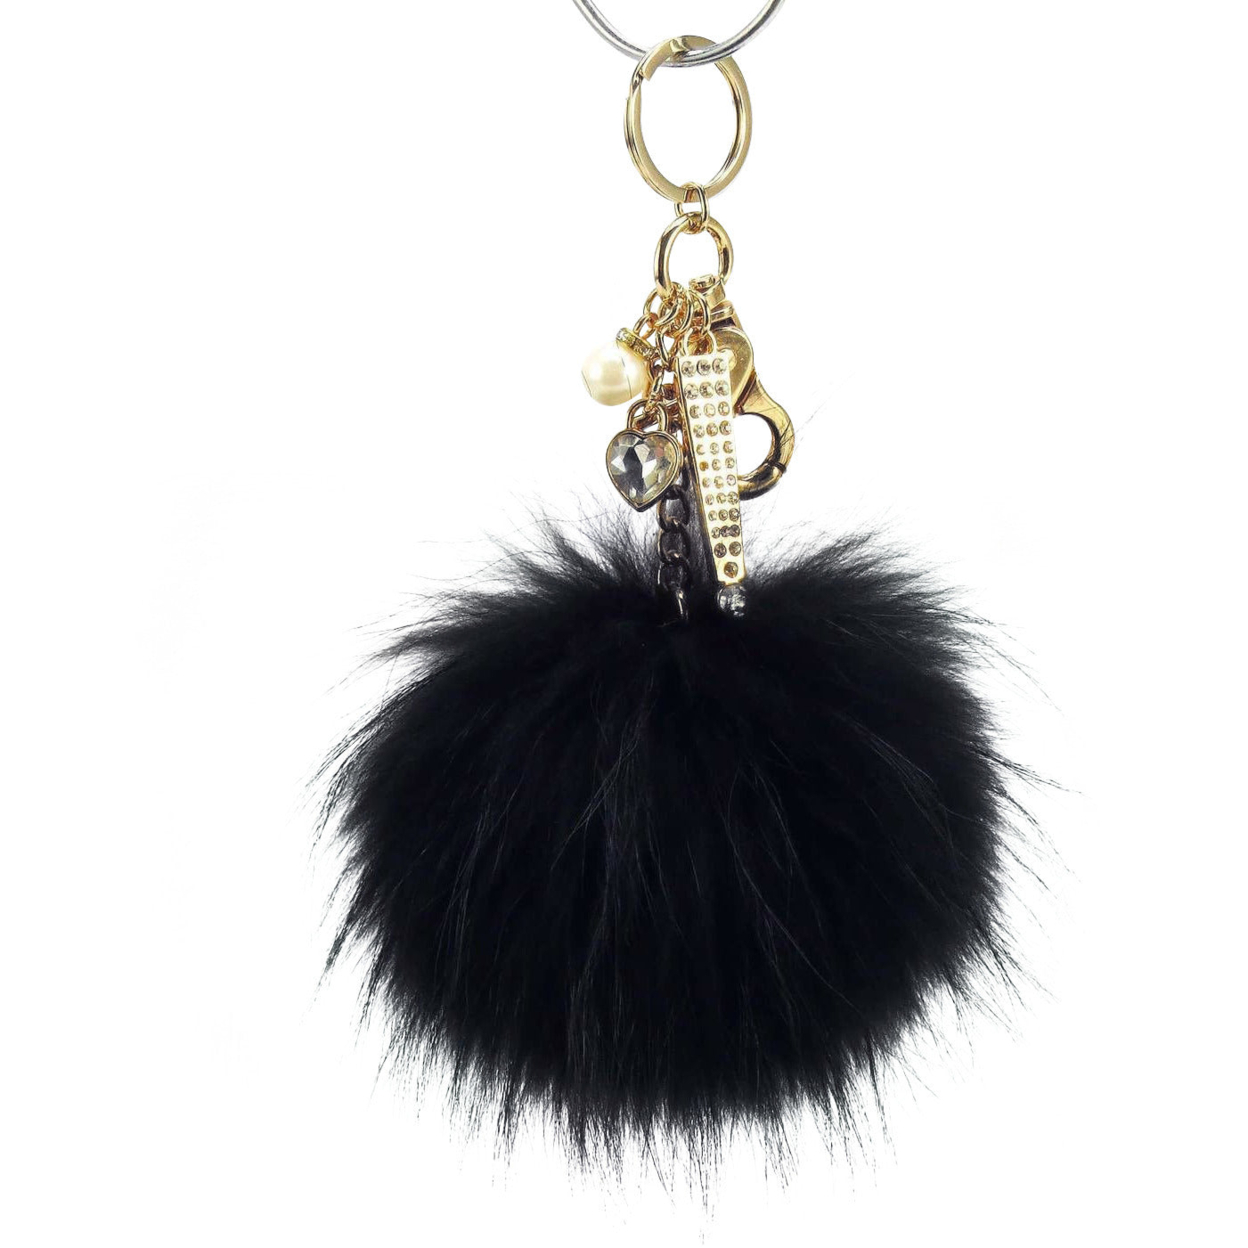 Real Fur Puff Ball Pom-Pom 6 Accessory Dangle Purse Charm - Black With Gold Hardware